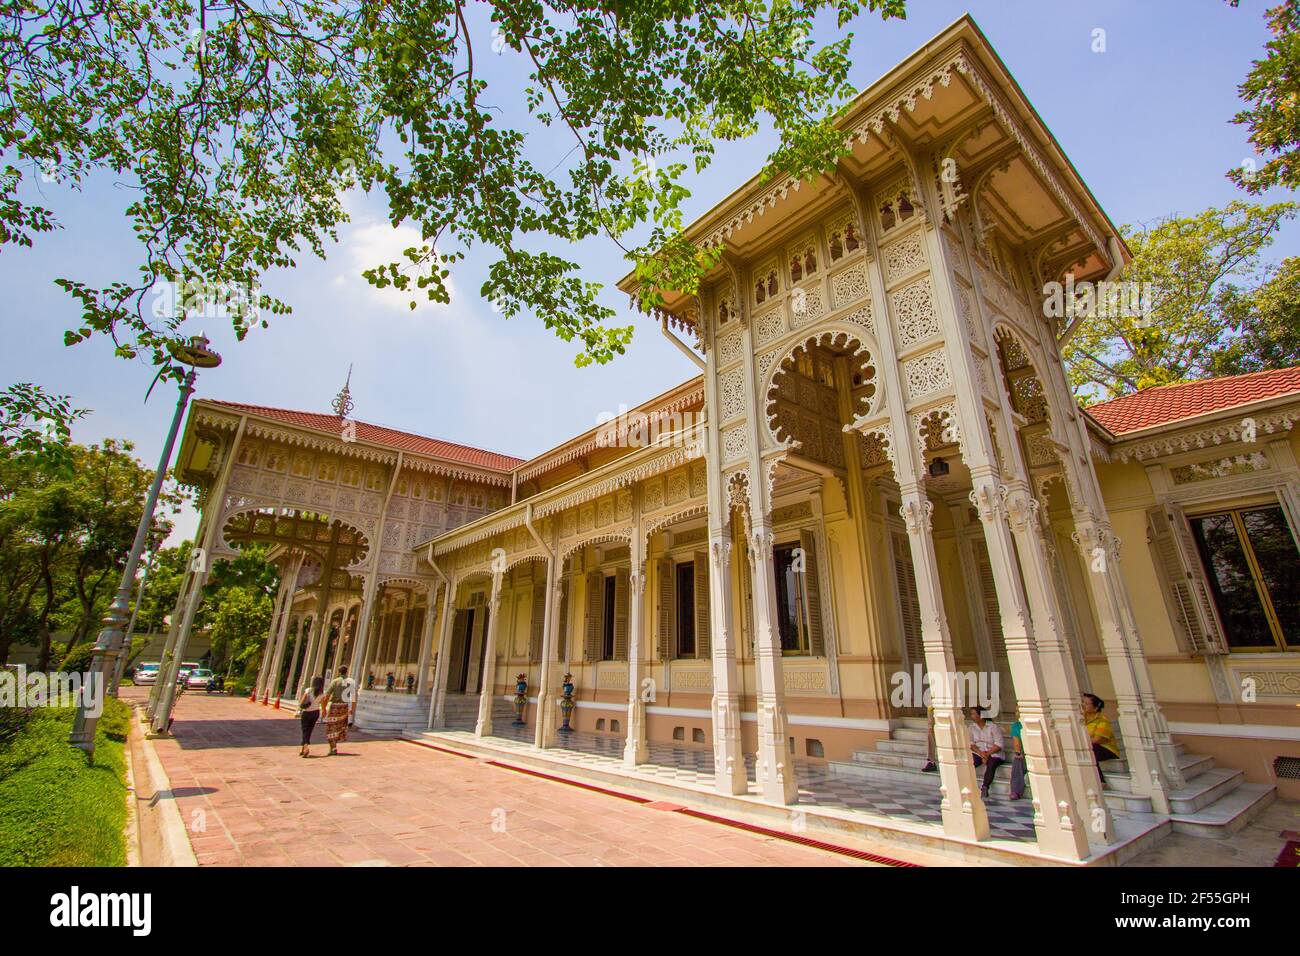 The ornate wooden carved exterior, facade of the Abhisek Dusit Throne Hall. In Bangkok, Thailand. Stock Photo